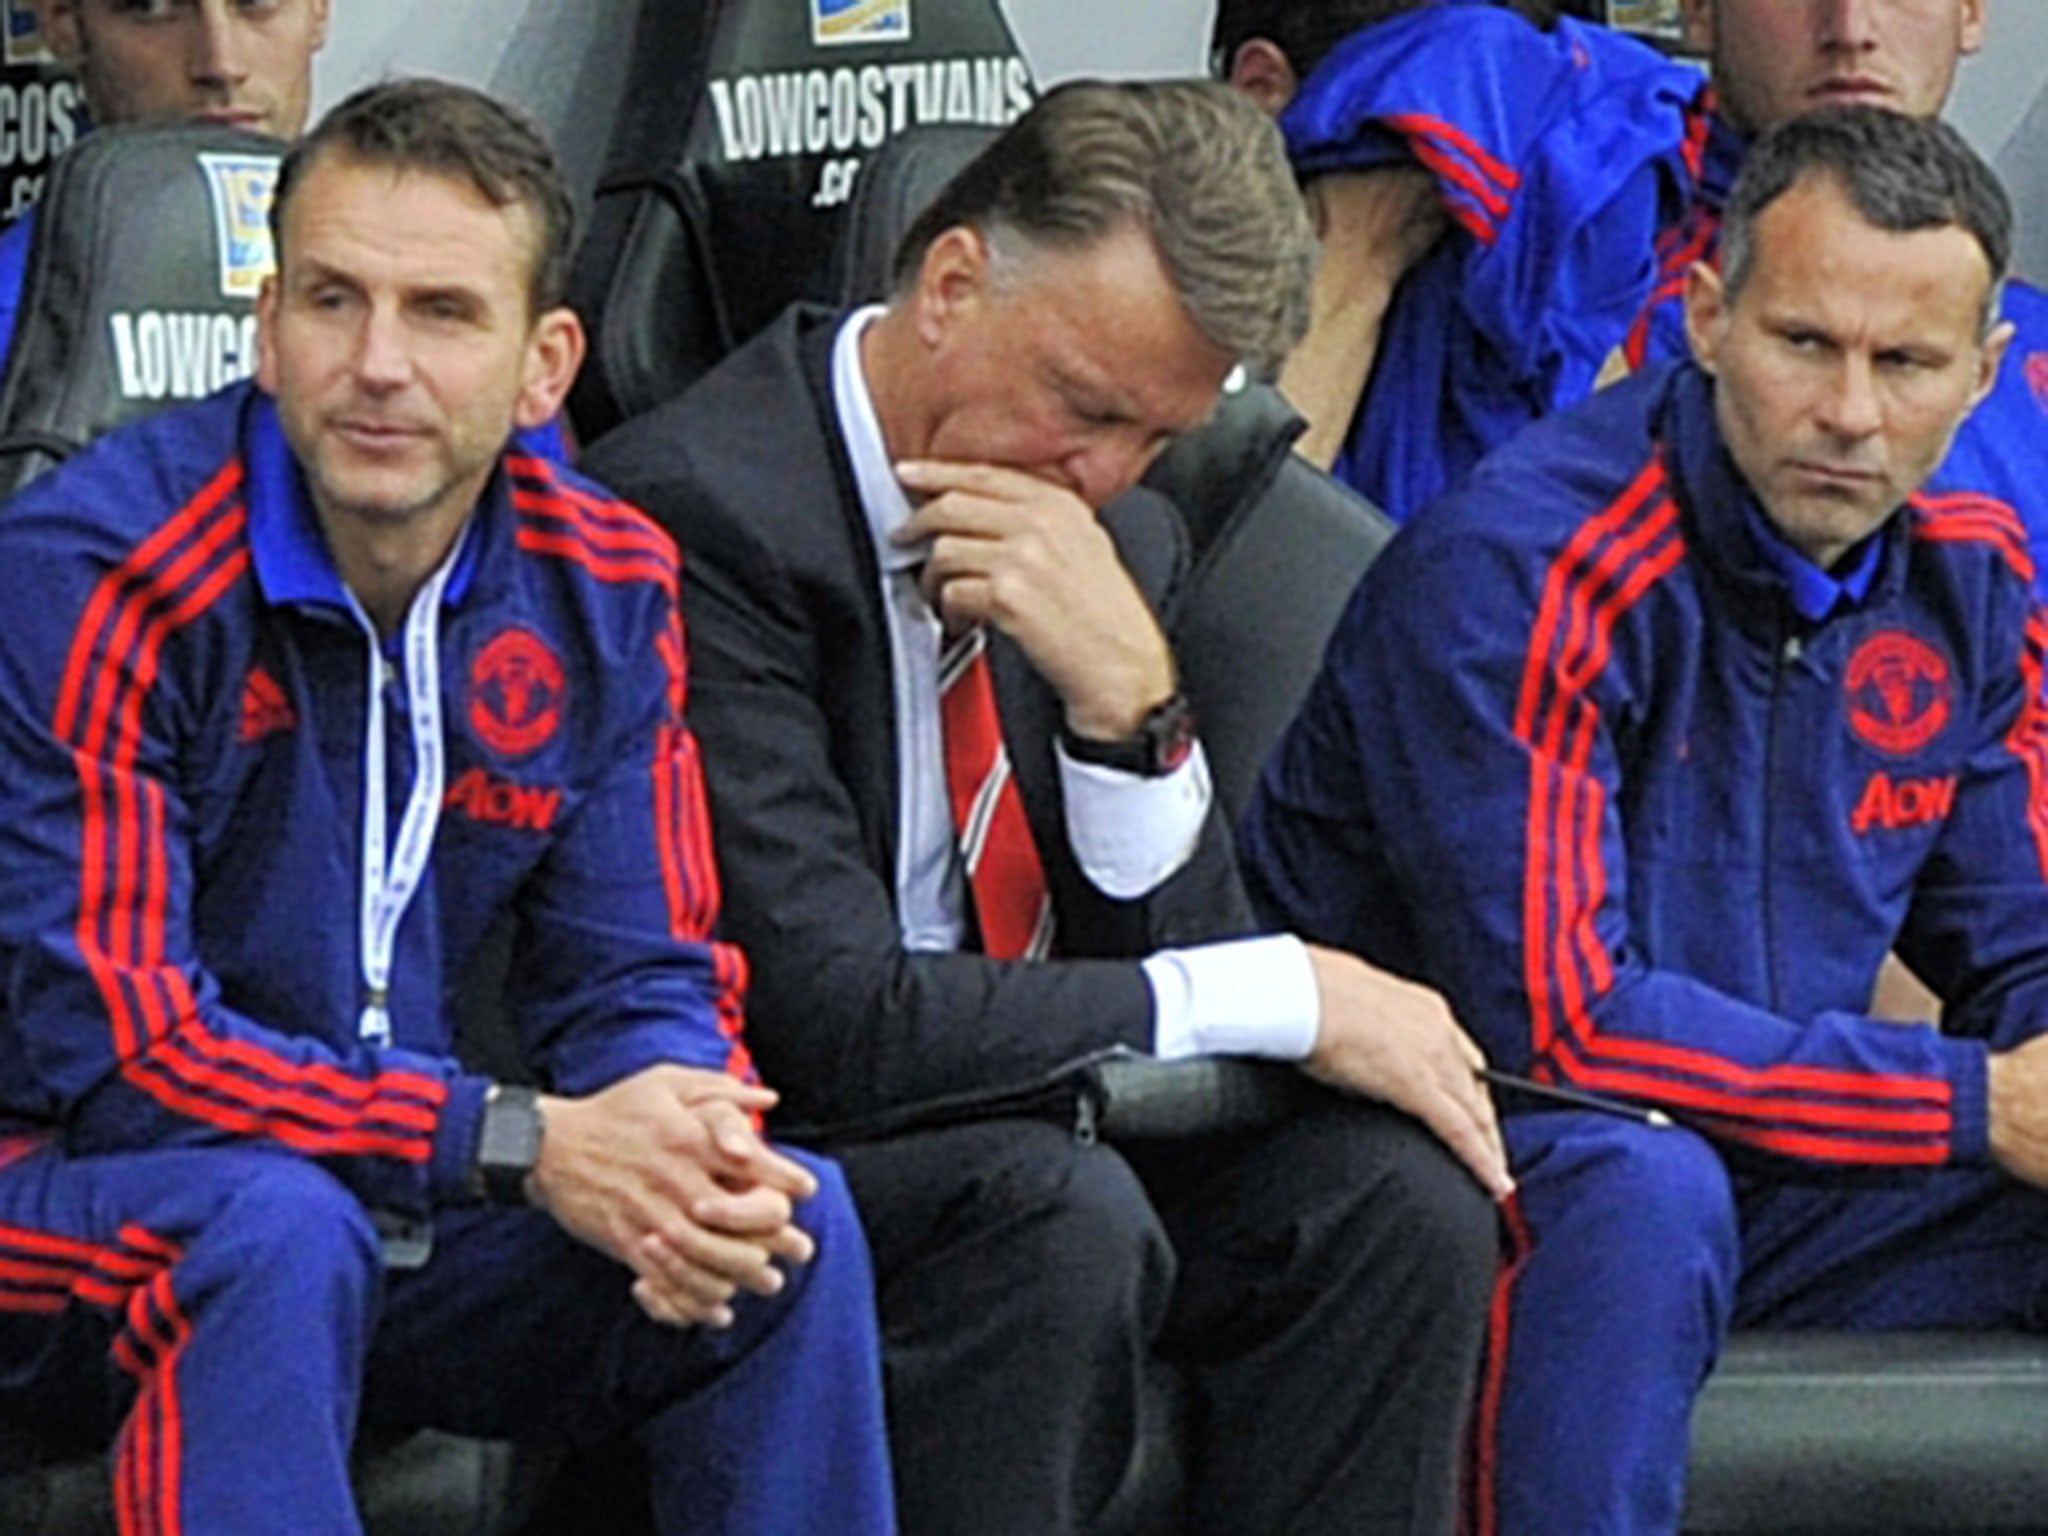 Manchester United manager Louis van Gaal is lost for answers as his team slide to defeat against Swansea